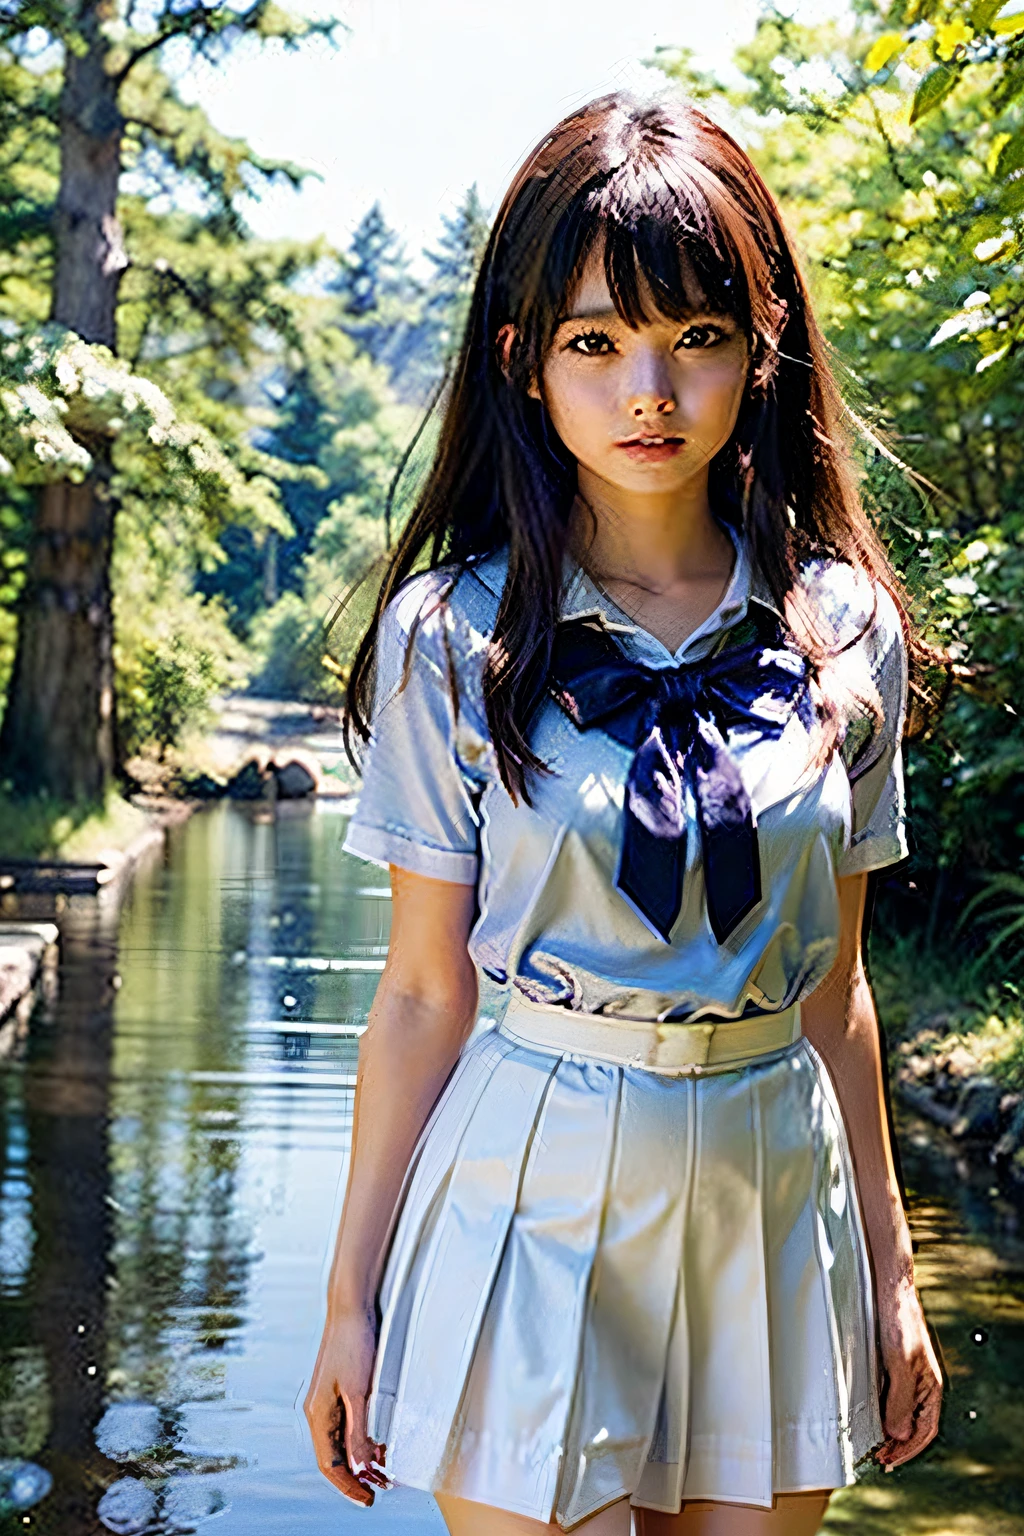 nffsw,​masterpiece、high-level image quality、The ultra -The high-definition、8k wallpaper、((Extremely beautiful face、kawaii faces))、Bright brown eyes、((Double beautiful eyes))、no-makeup、Well-formed face,full body Esbian、a sailor suit,Blue Ribbon、White skirt、One Beautiful Girl, hi-school girl、15yo student、Hairstyle with bangs、great outdoors、Blue swamp in the coniferous forest belt、Beautiful girl walking in the water and coming here、Embarrassment、confusion、Ephemeral、dark sky、side lights、Noise Reduction、Pale and soft light、diffuse glow、Hair that flutters in the wind、A skirt that flutters in the wind,pantiy、White panty、Soaring skirt、pantiy